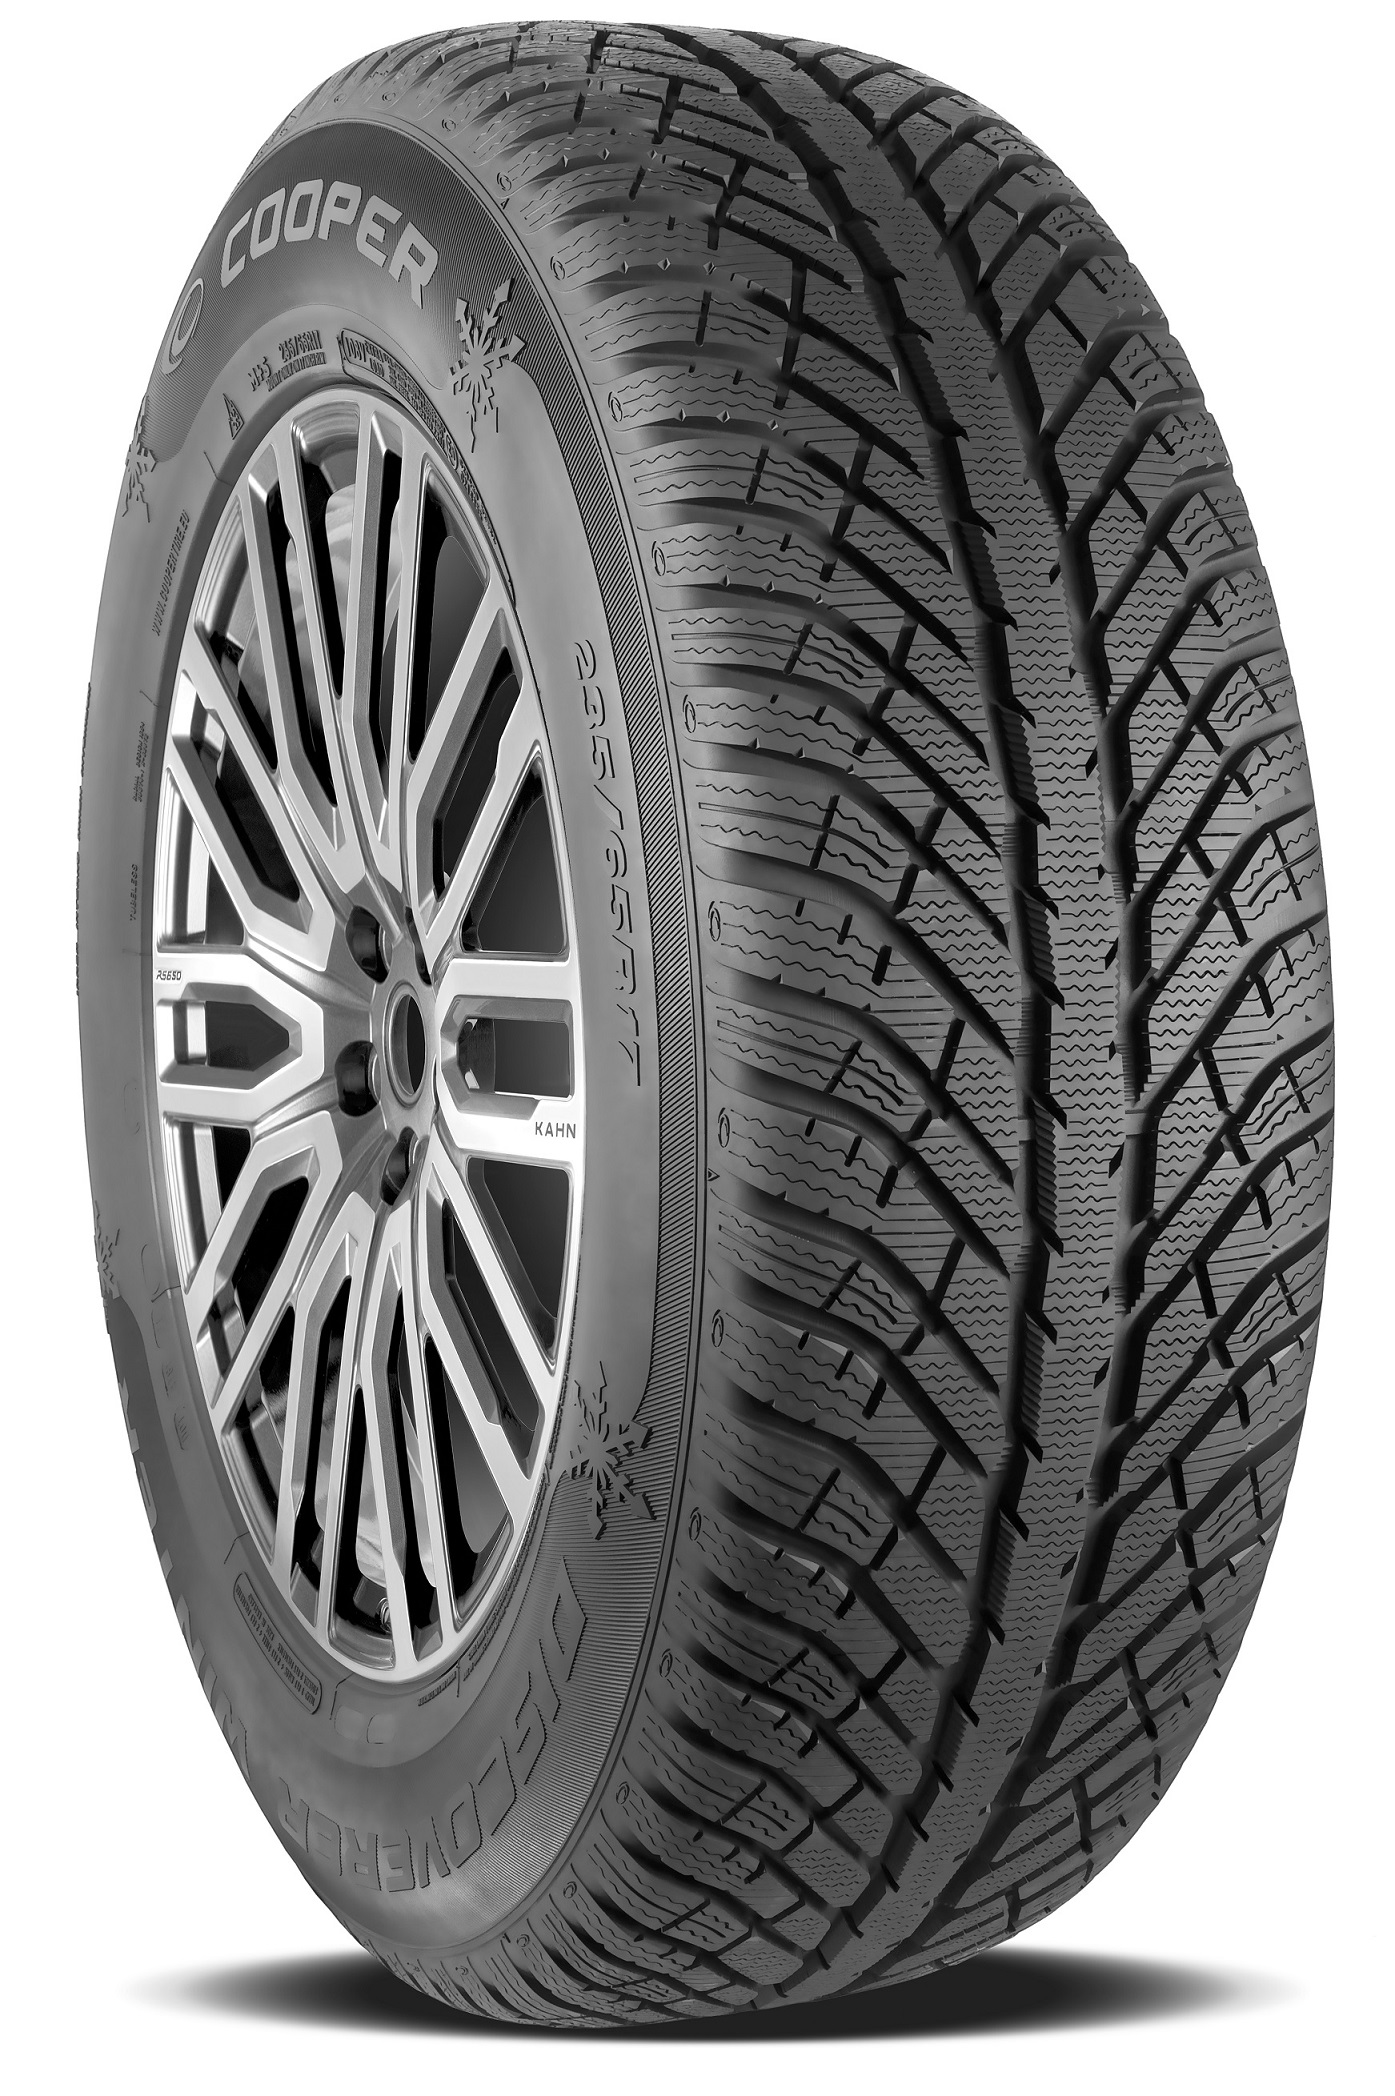 Gomme Nuove Cooper Tyres 215/55 R16 97H DISCOVERER WINTER pneumatici nuovi Invernale